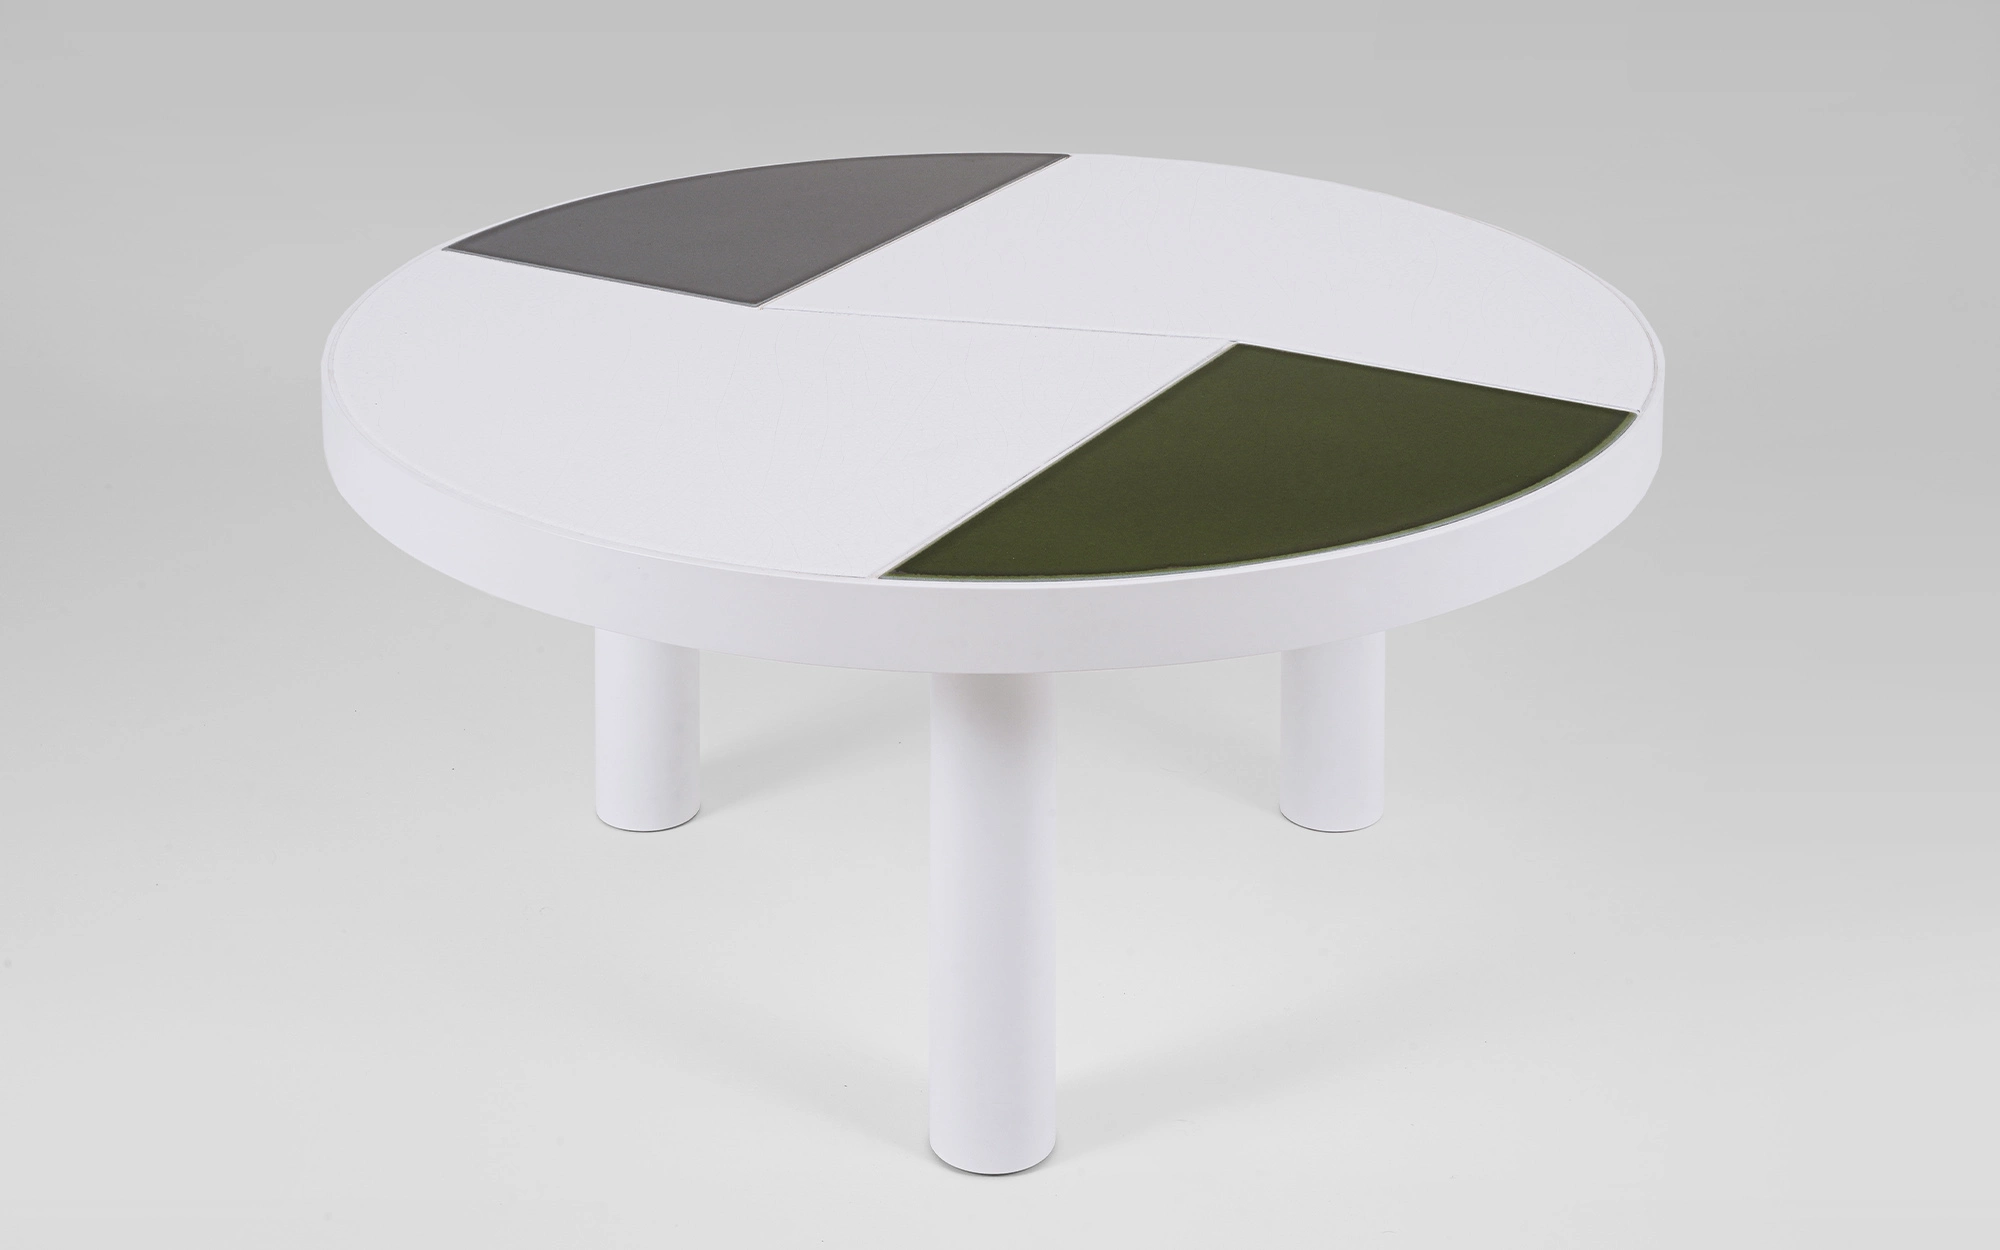 Fraction Coffee Table - Pierre Charpin - Side table - Galerie kreo